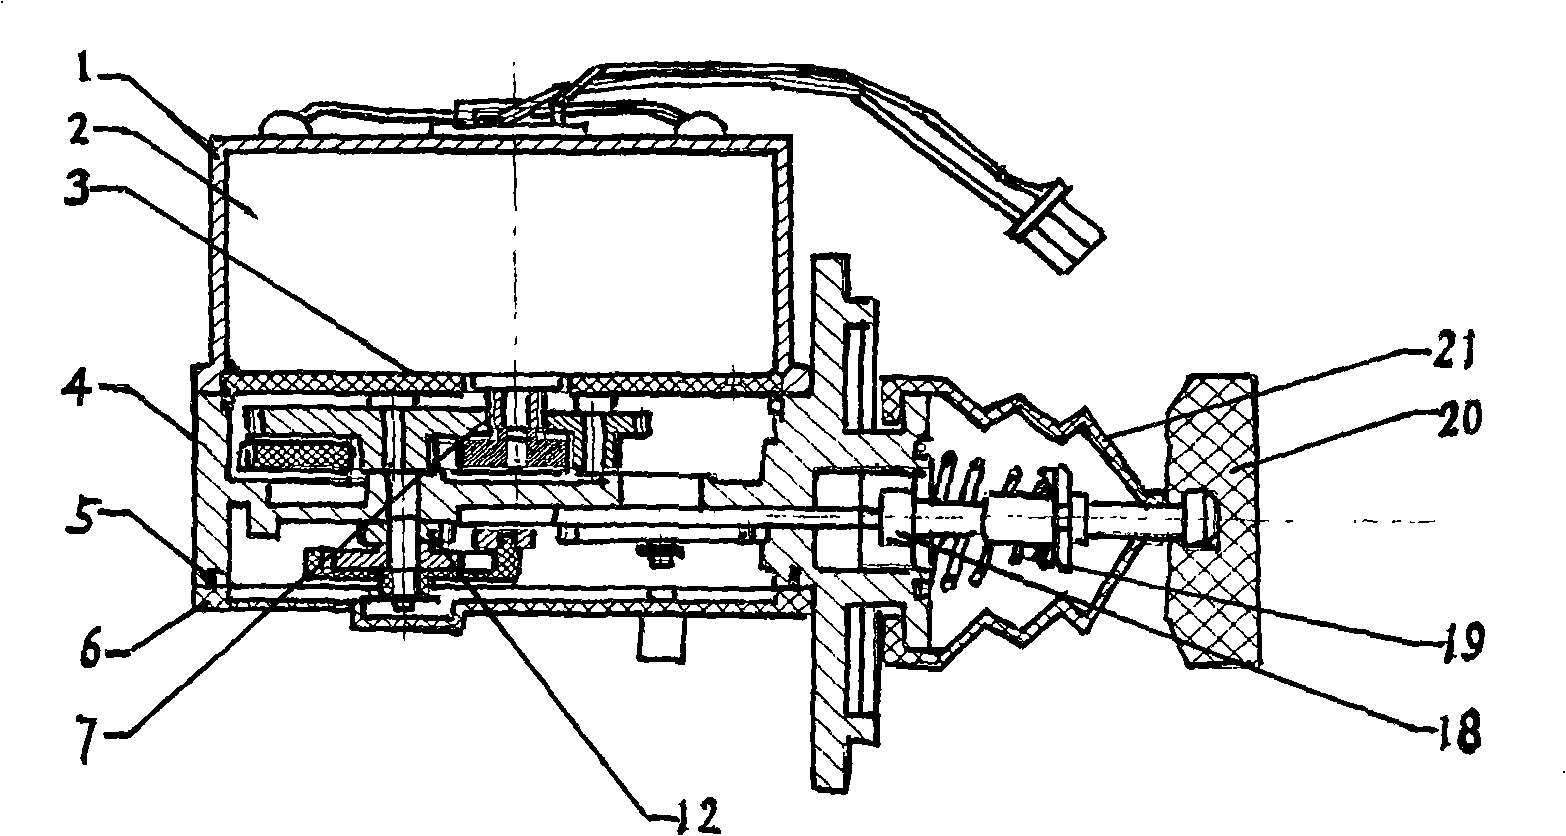 Overdrive motor valve with automatic meshing and de-meshing functions